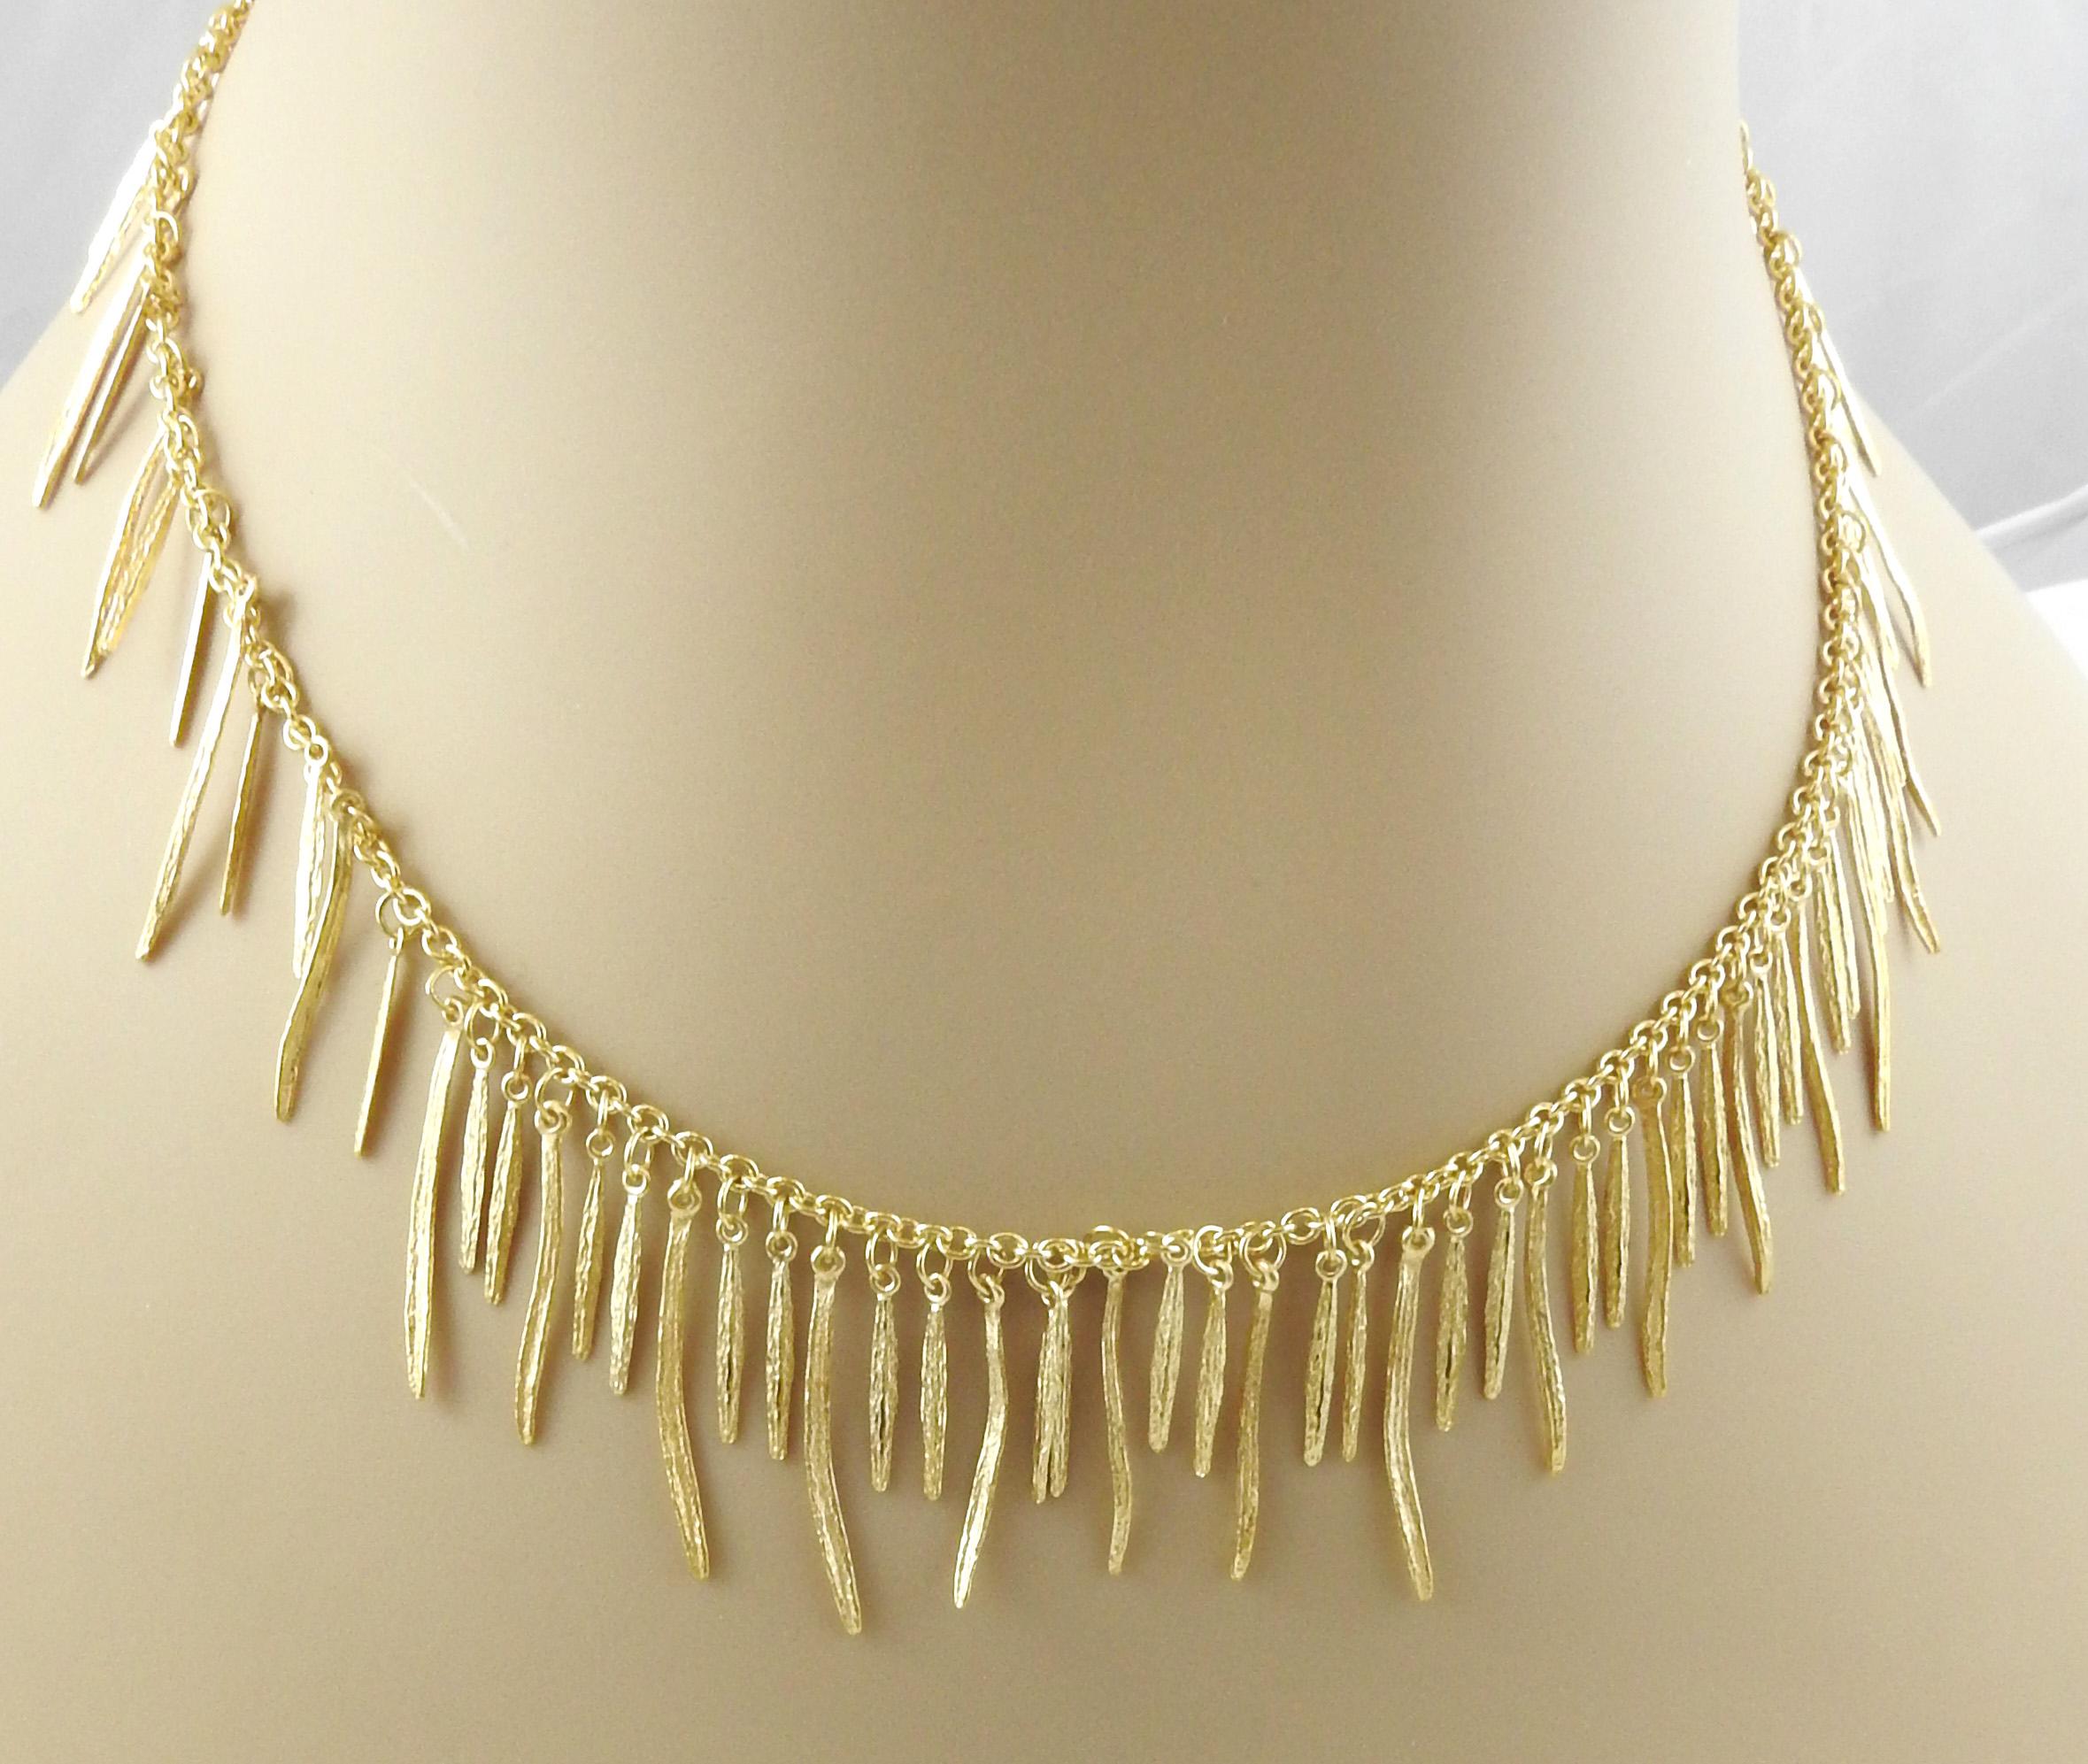 Roberto Coin 18K Yellow Gold Elephant Skin Tassel Fringe Necklace

This beautiful fluid necklace has a frosted, shimmery yellow gold look and feel. 

This necklace is set in 18K yellow gold and is approx. 17